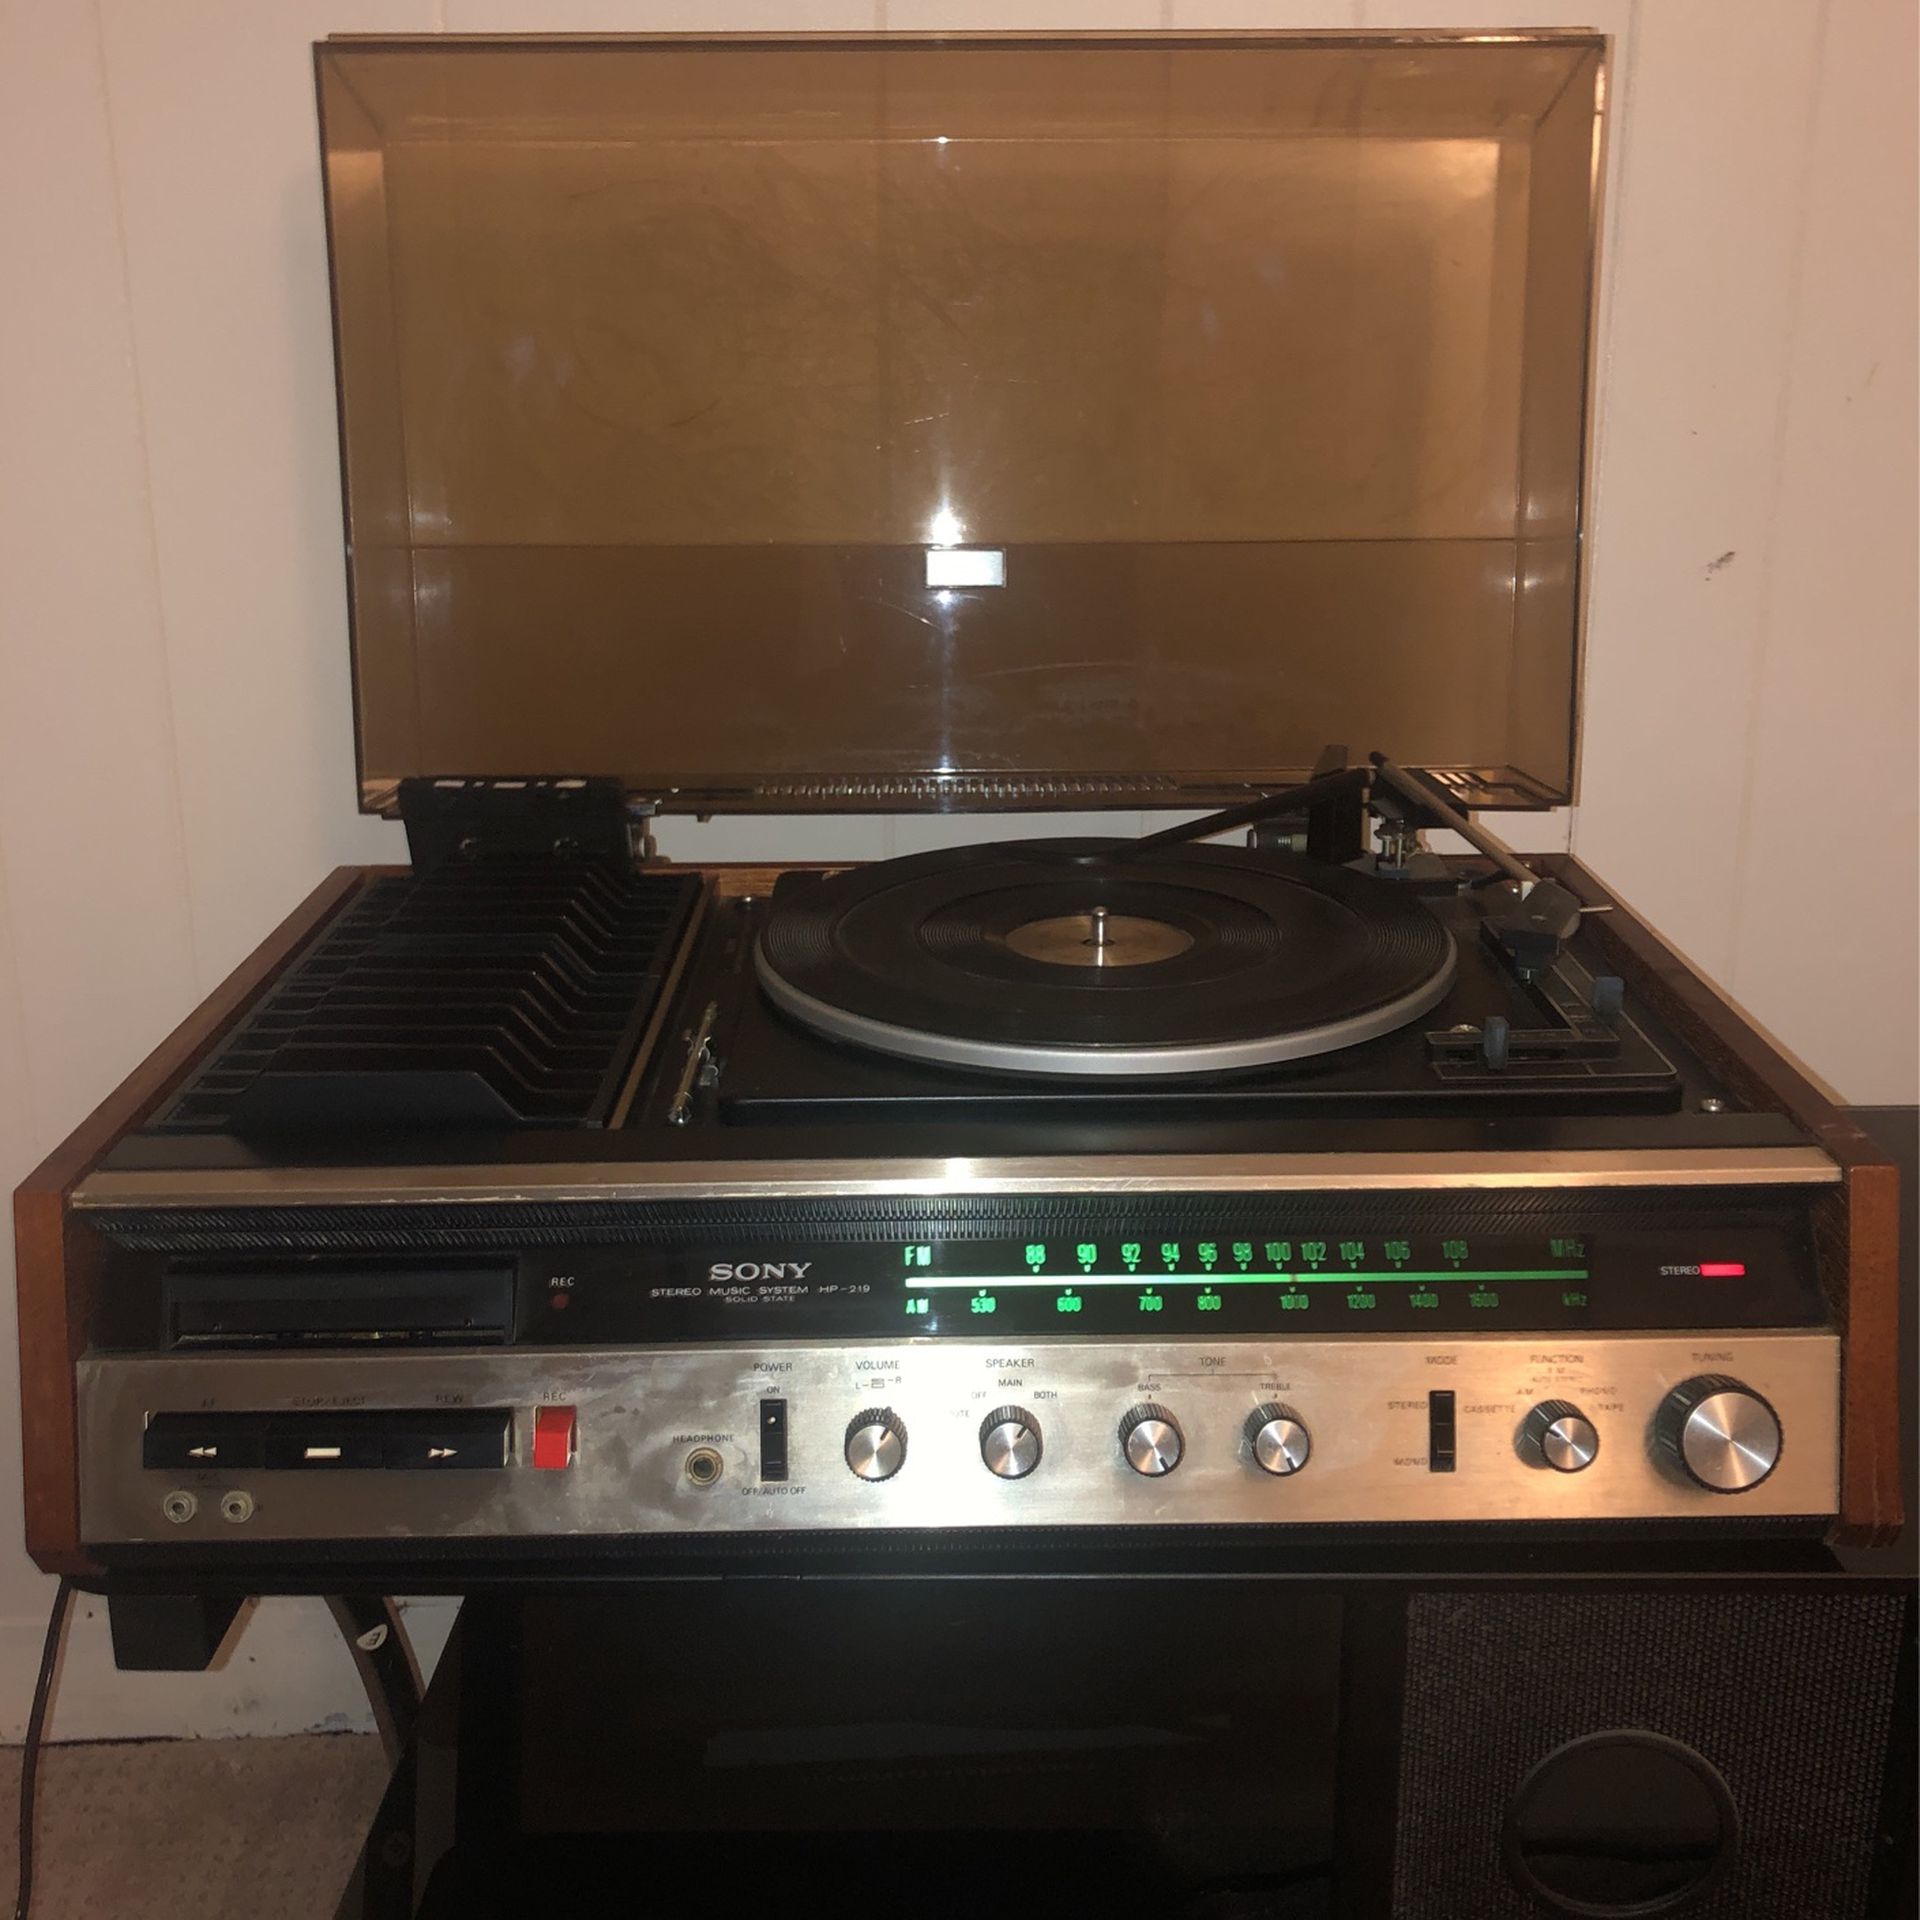 Sony Stereo Music System HP-219 Solid State